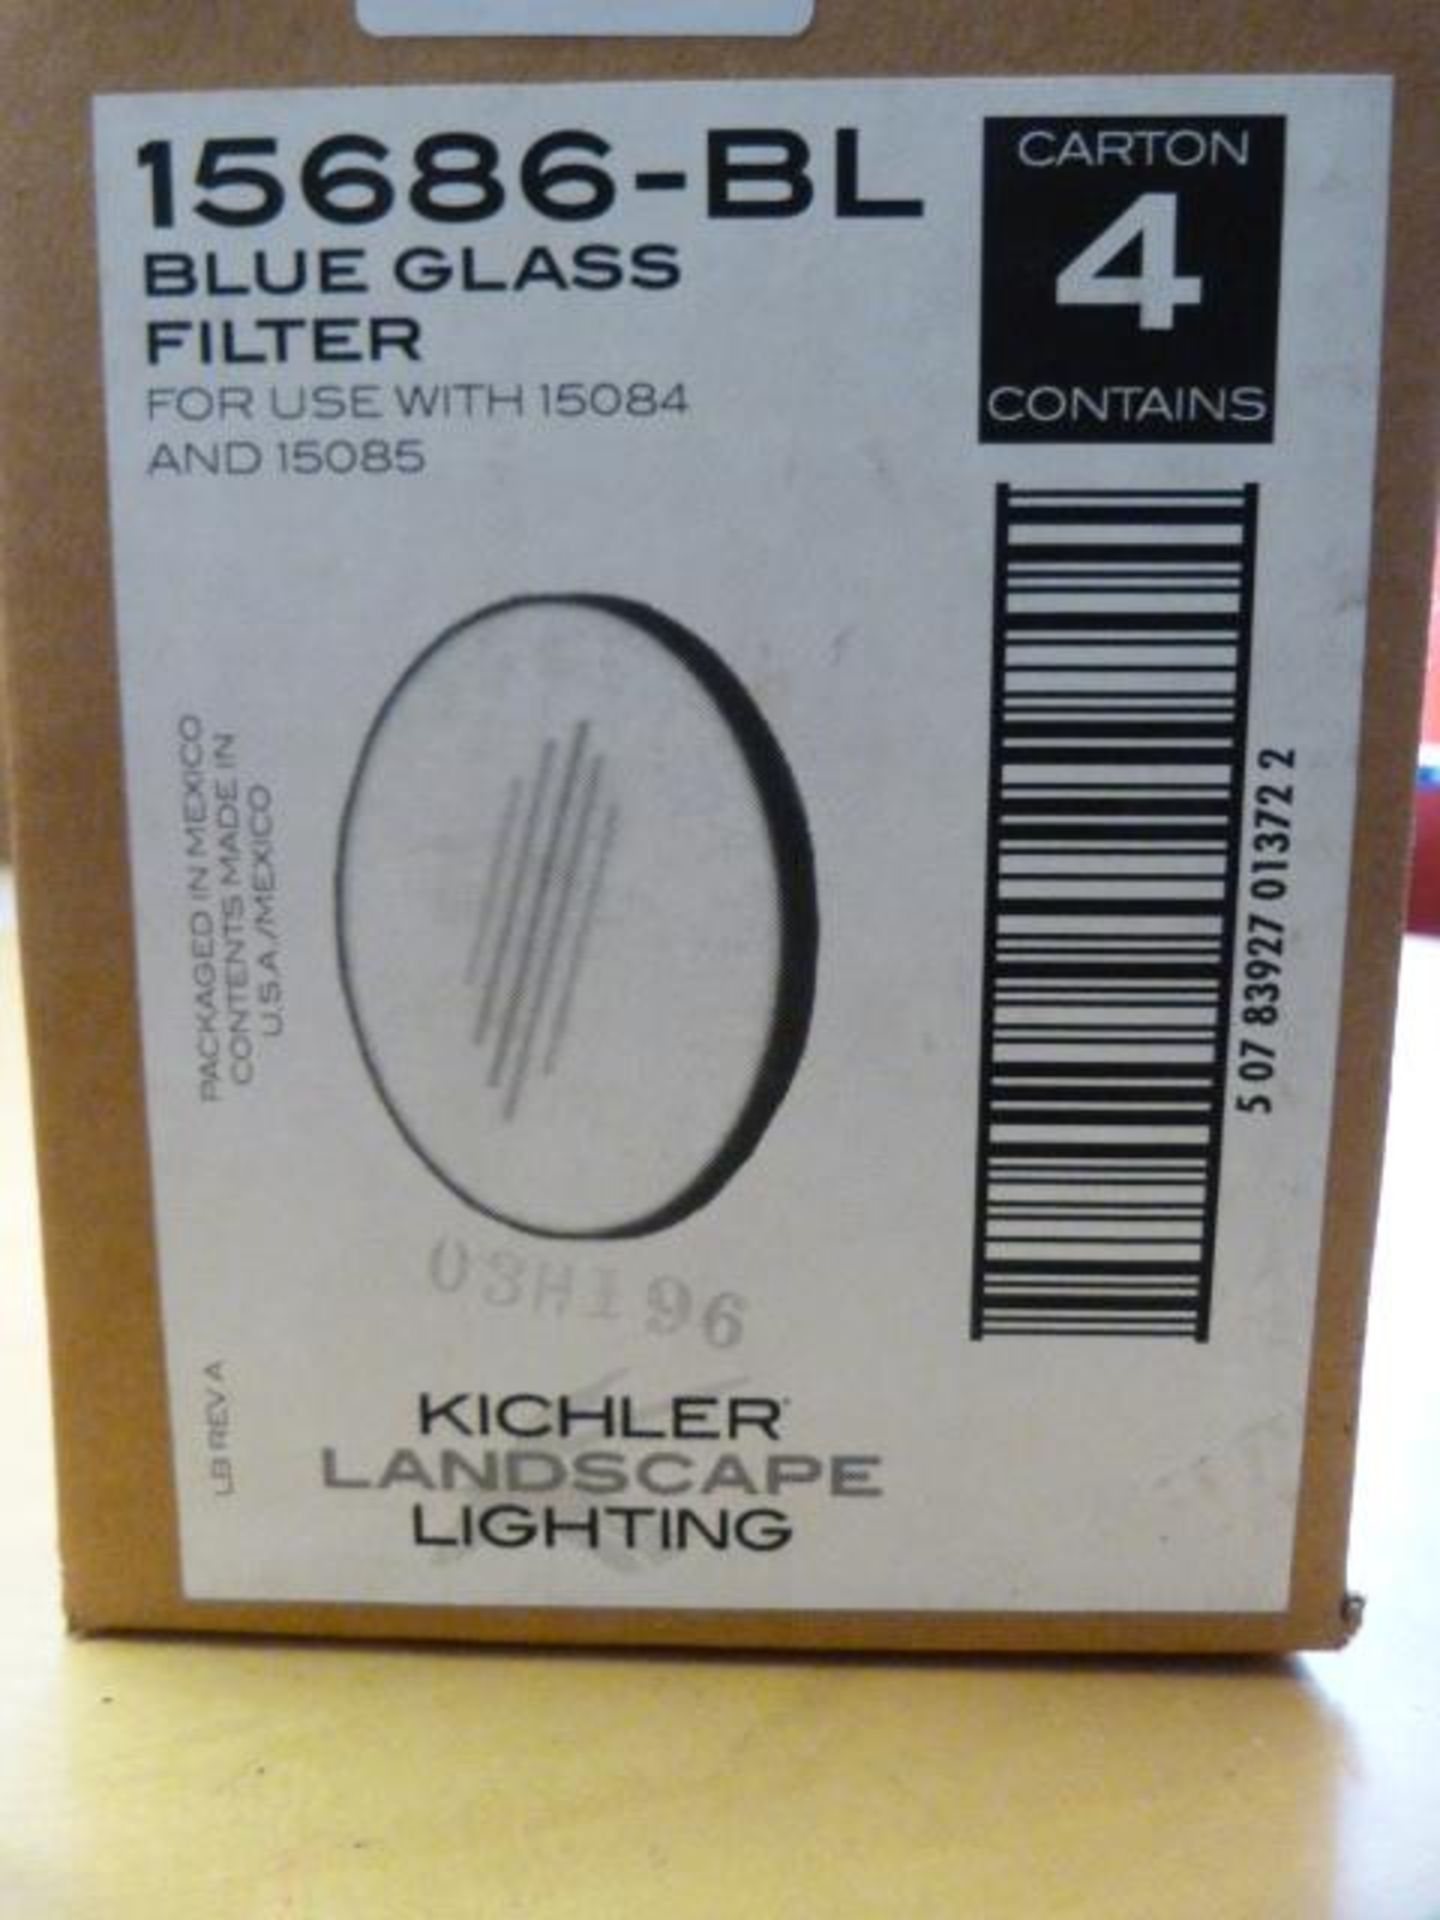 *Box of Four 15686-BL Blue Glass Filters for use with 15084 & 15085 - Image 2 of 2